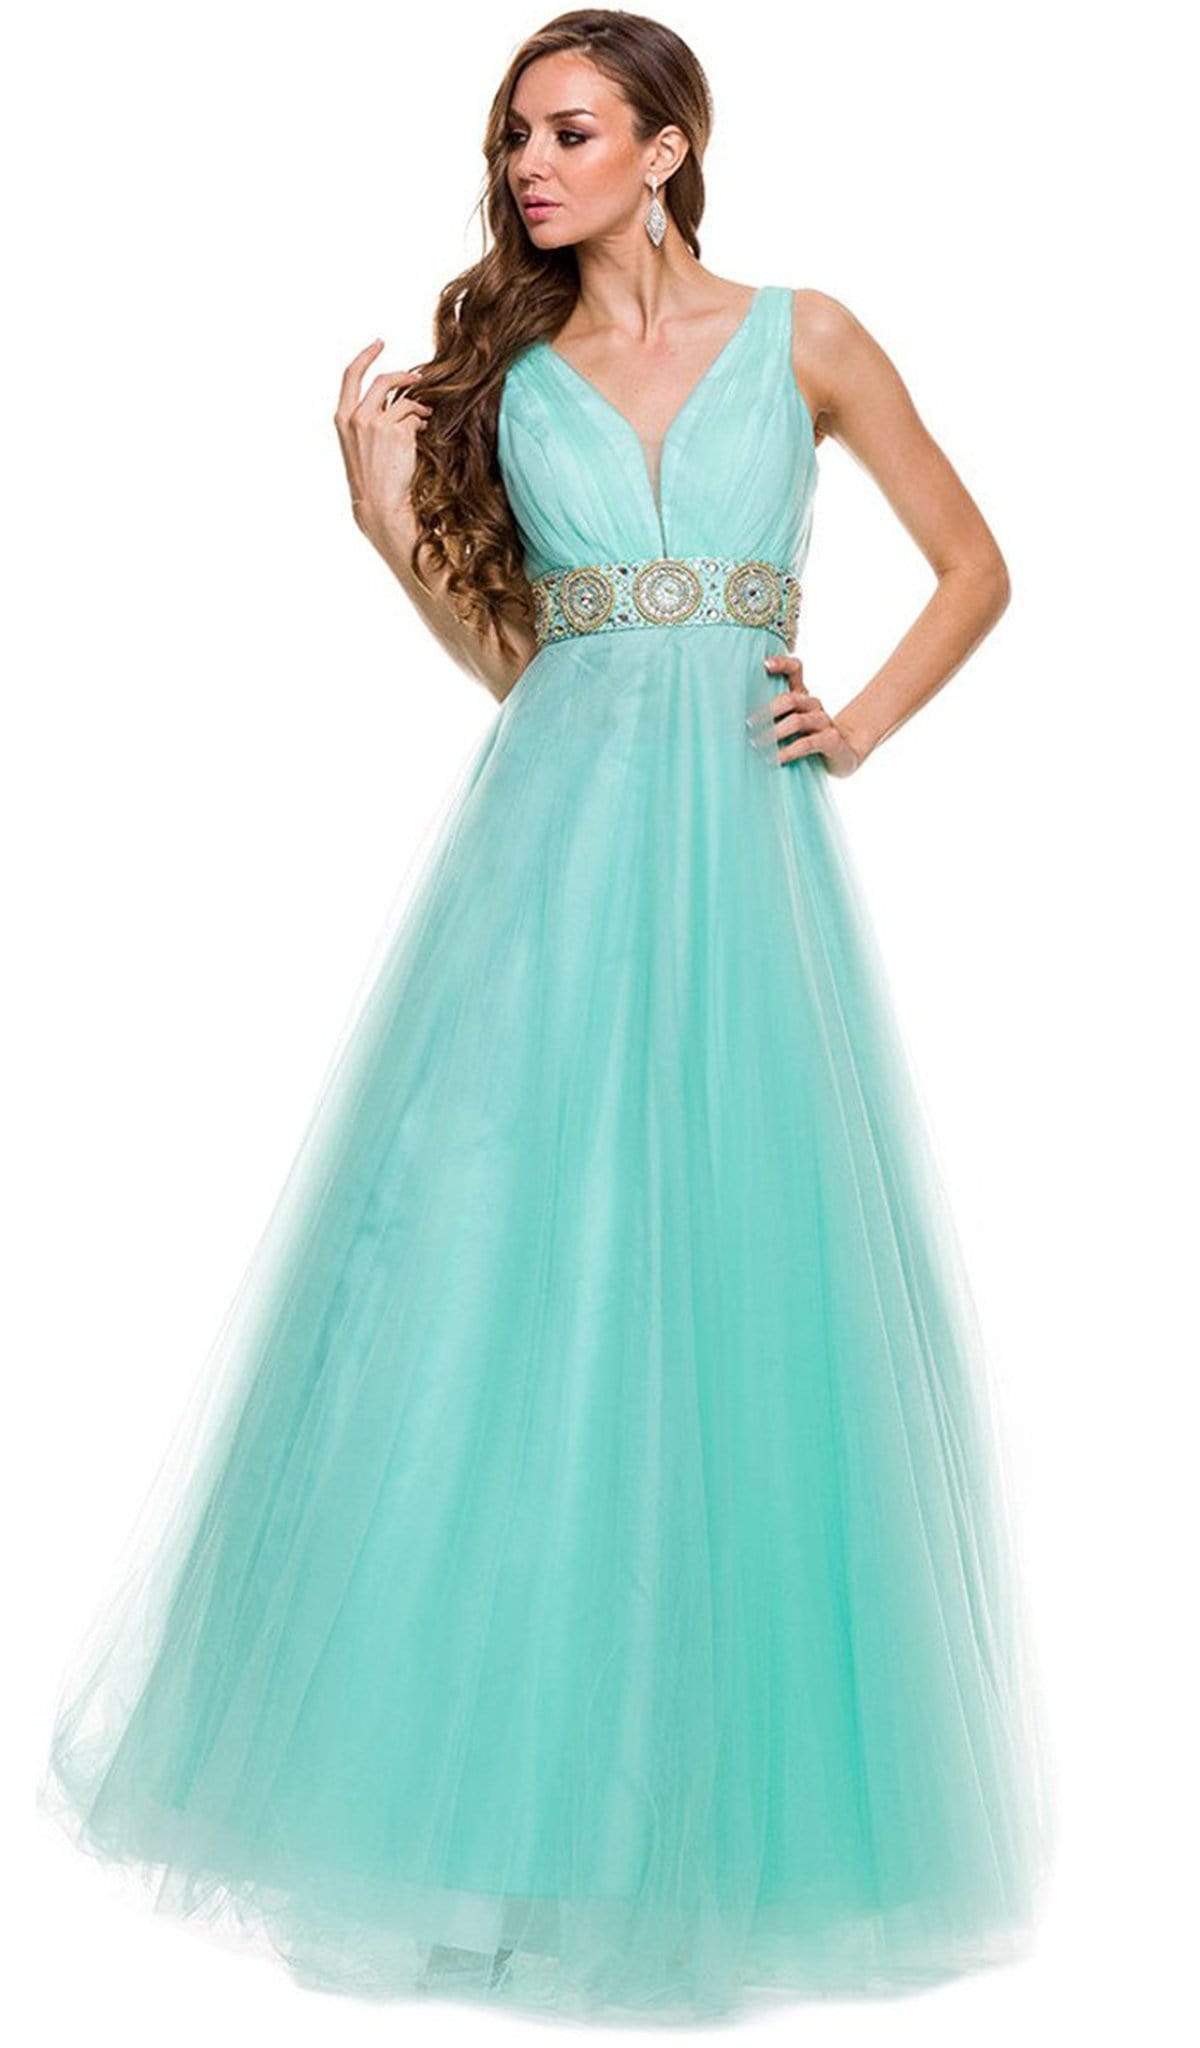 Nox Anabel - 3134 Sleeveless Ruched A-Line Long Gown Special Occasion Dress XS / Mint Green